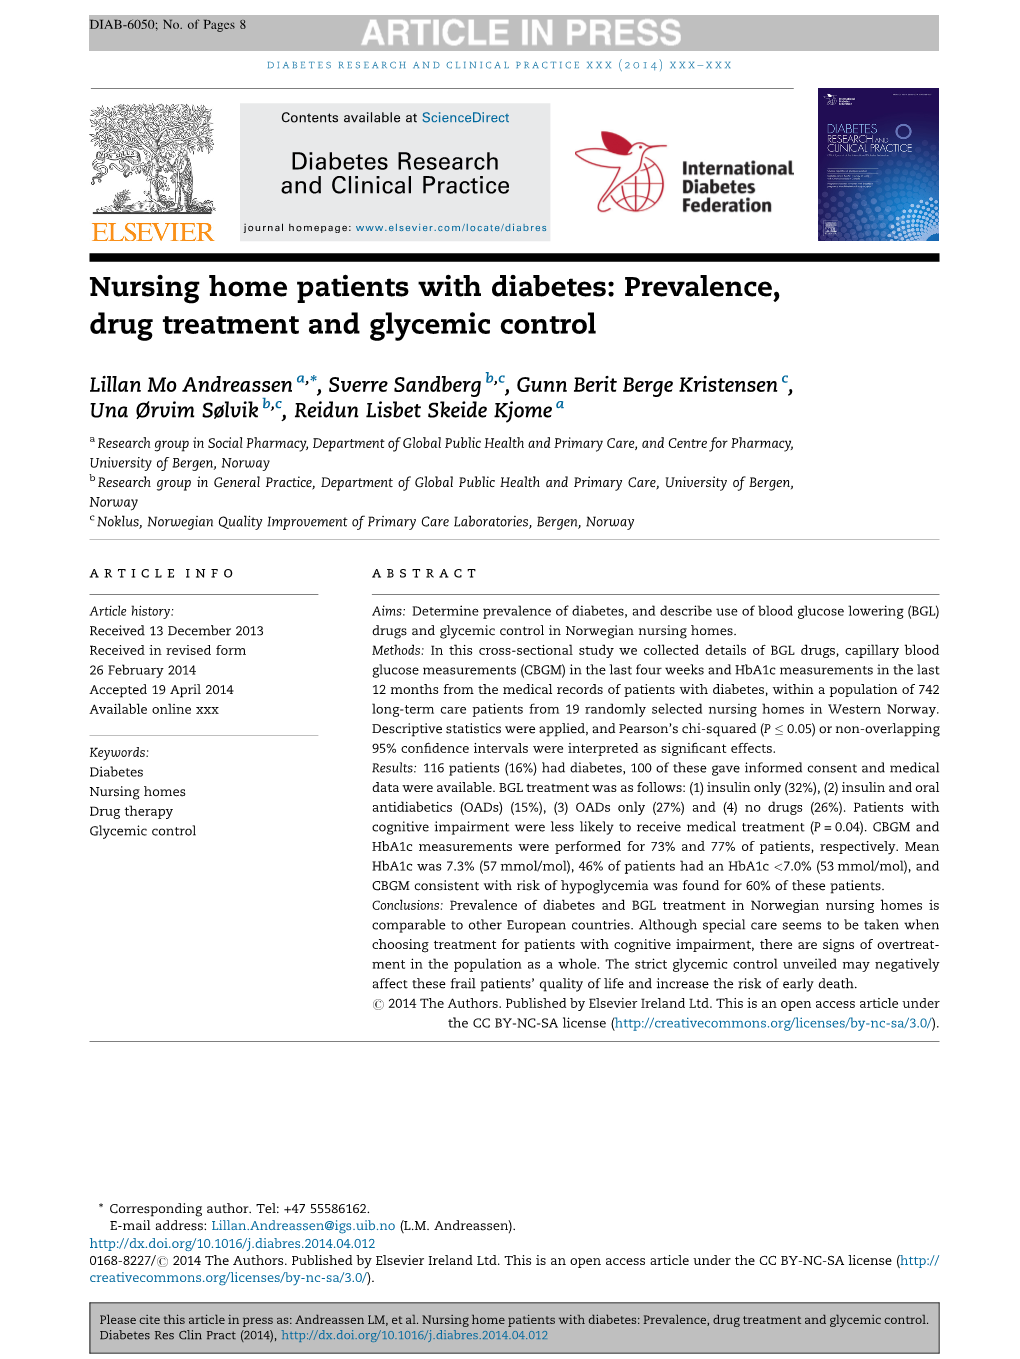 Prevalence, Drug Treatment and Glycemic Control